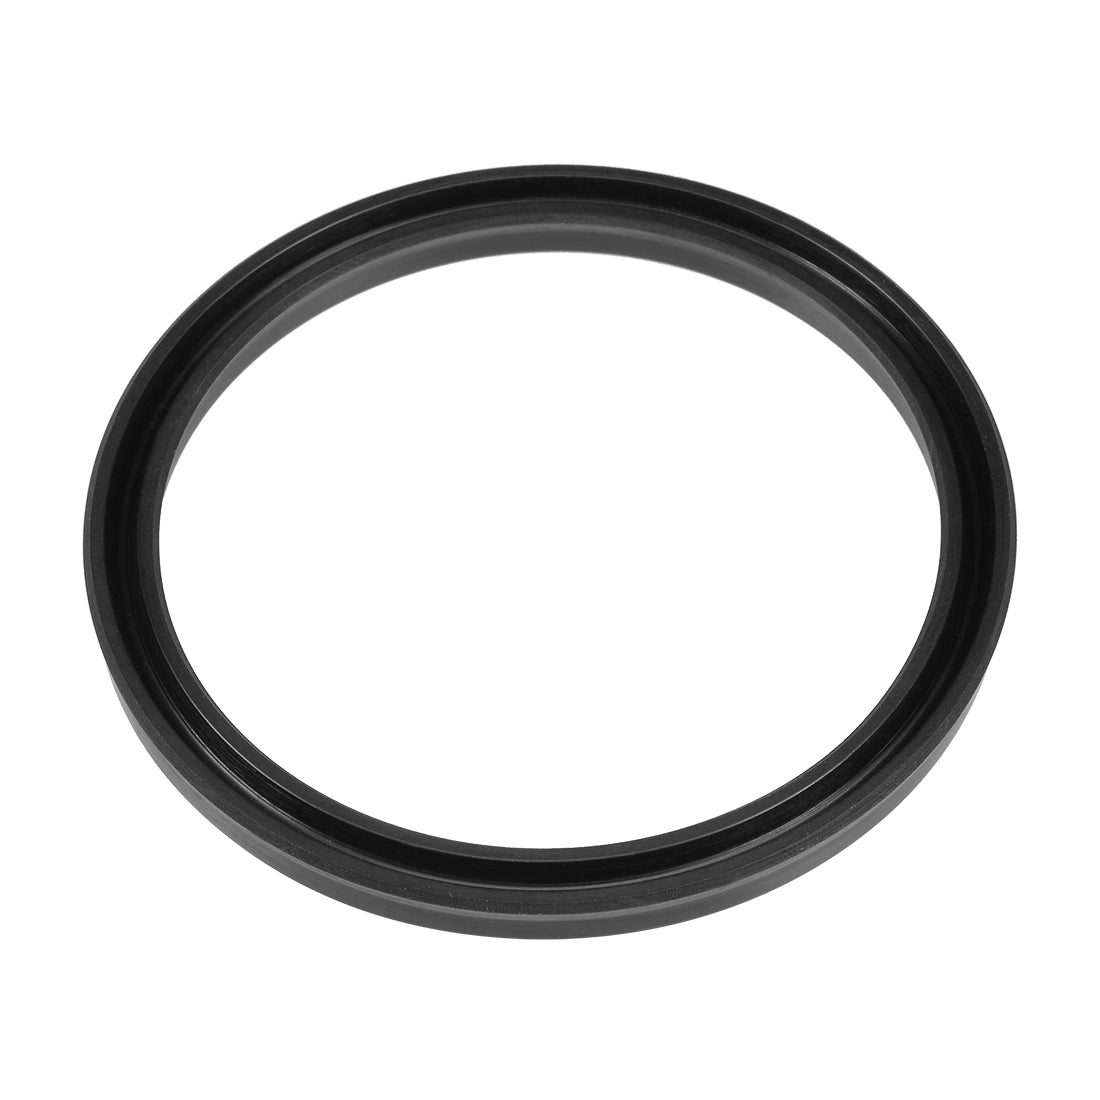 uxcell Uxcell Hydraulic Seal, Piston Shaft USH Oil Sealing O-Ring, 65mm x 75mm x 6mm